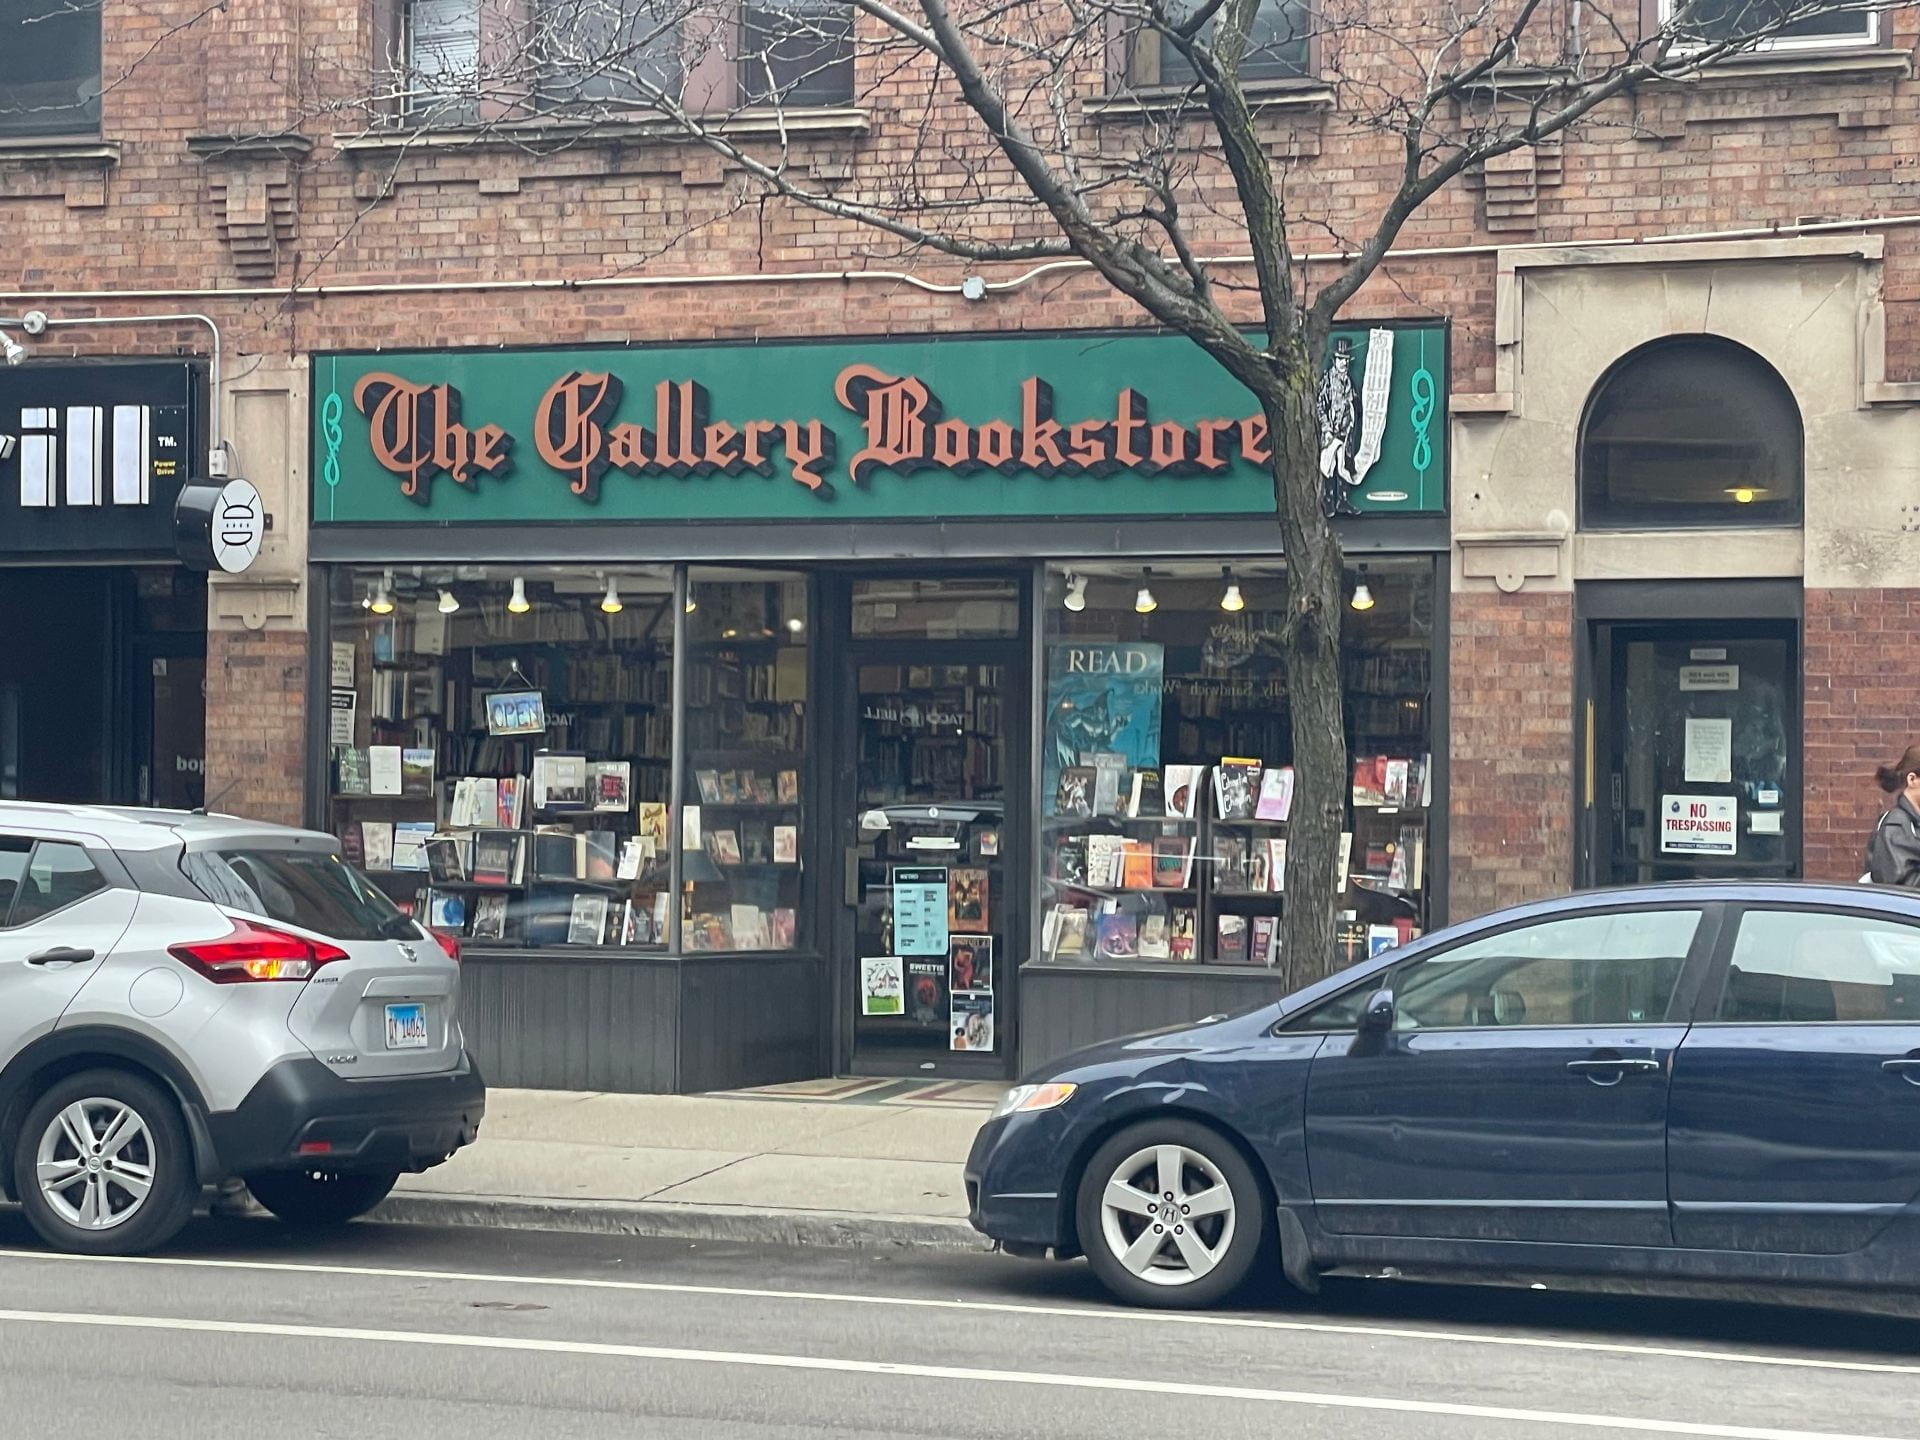 A photo showing the storefront of The Gallery Bookstore, a new and used book shop on Belmont Ave. in Chicago.